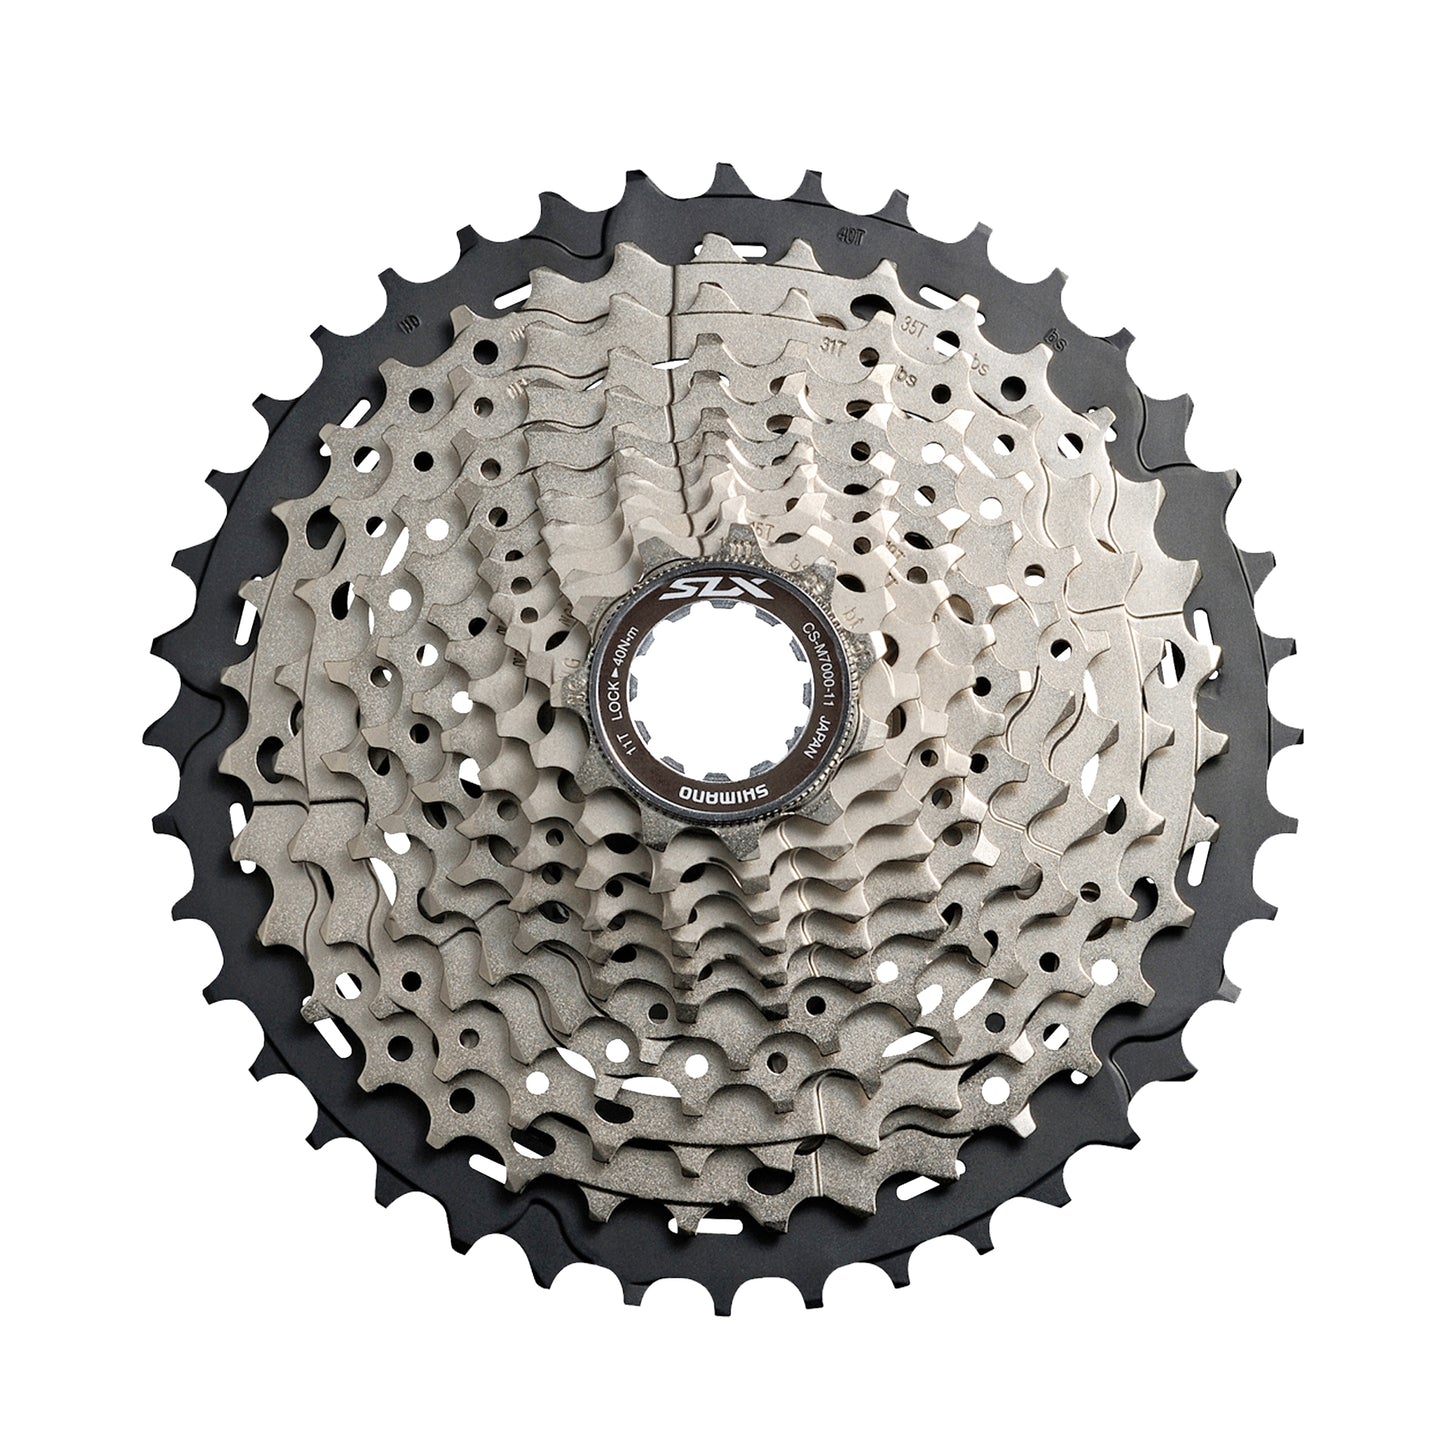 Shimano CS-M7000 SLX 11 Speed Cassette 11-42T buy online at Woolys Wheels with FREE delivery!